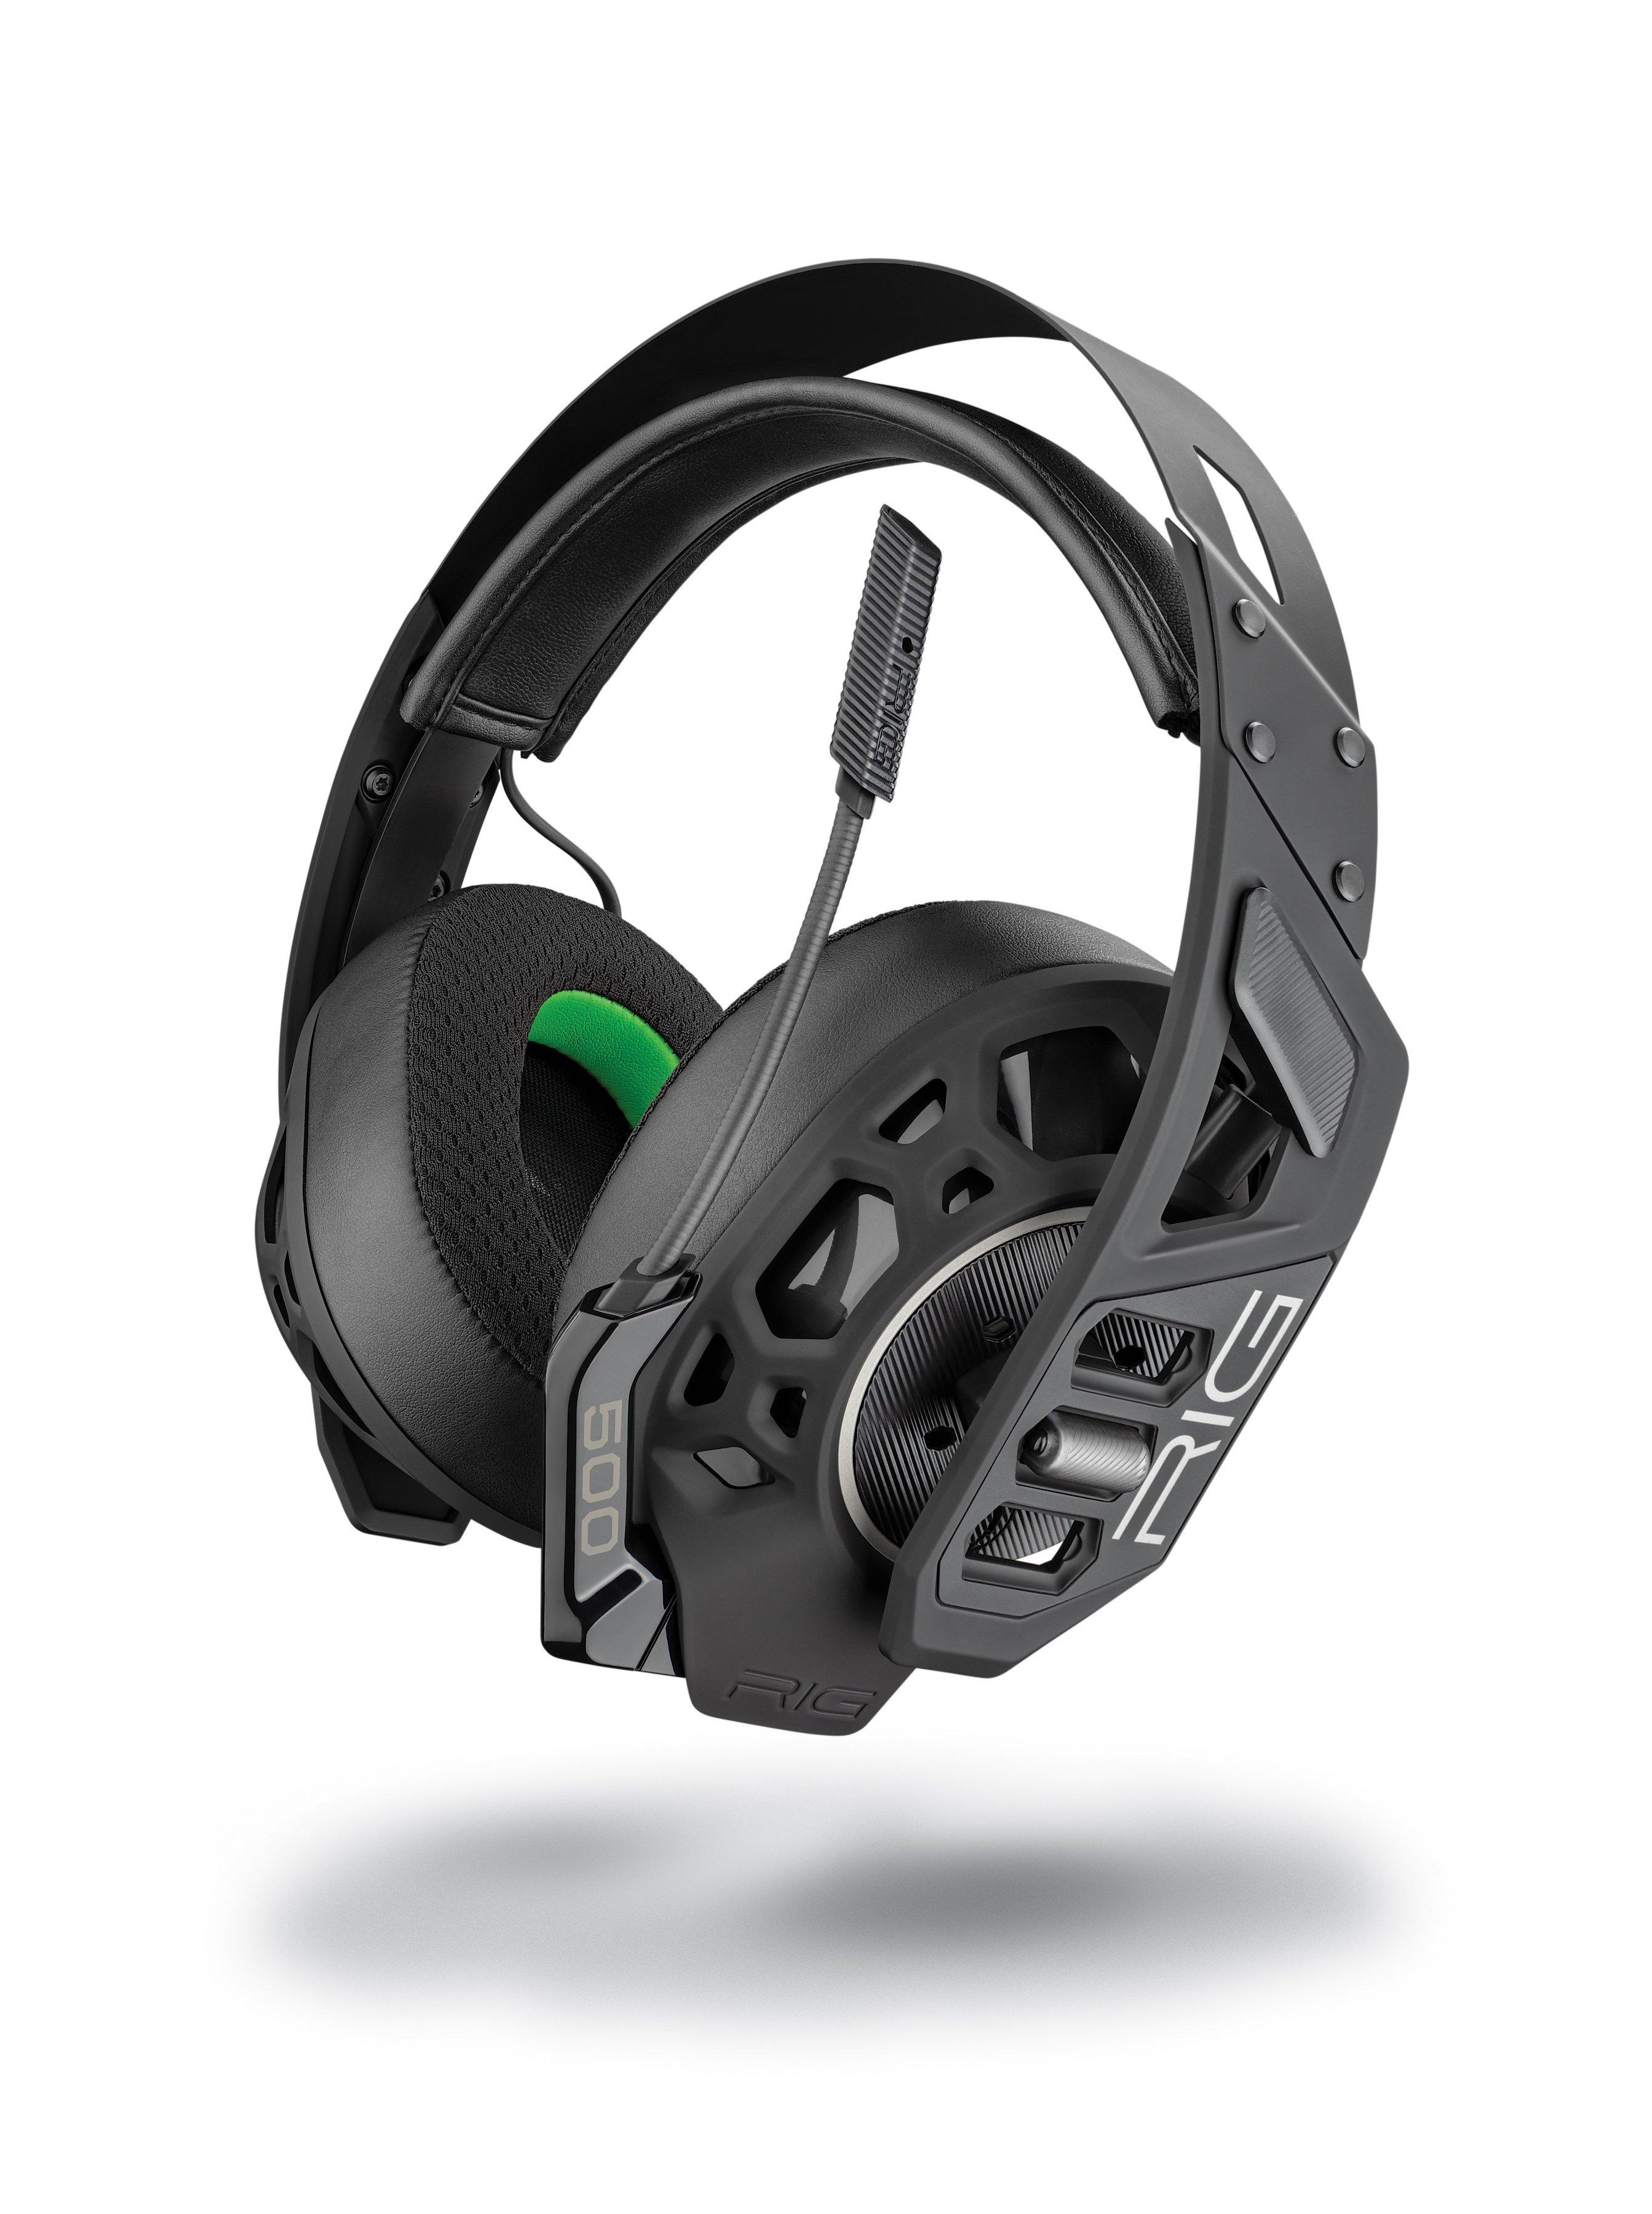 rig gaming headset xbox